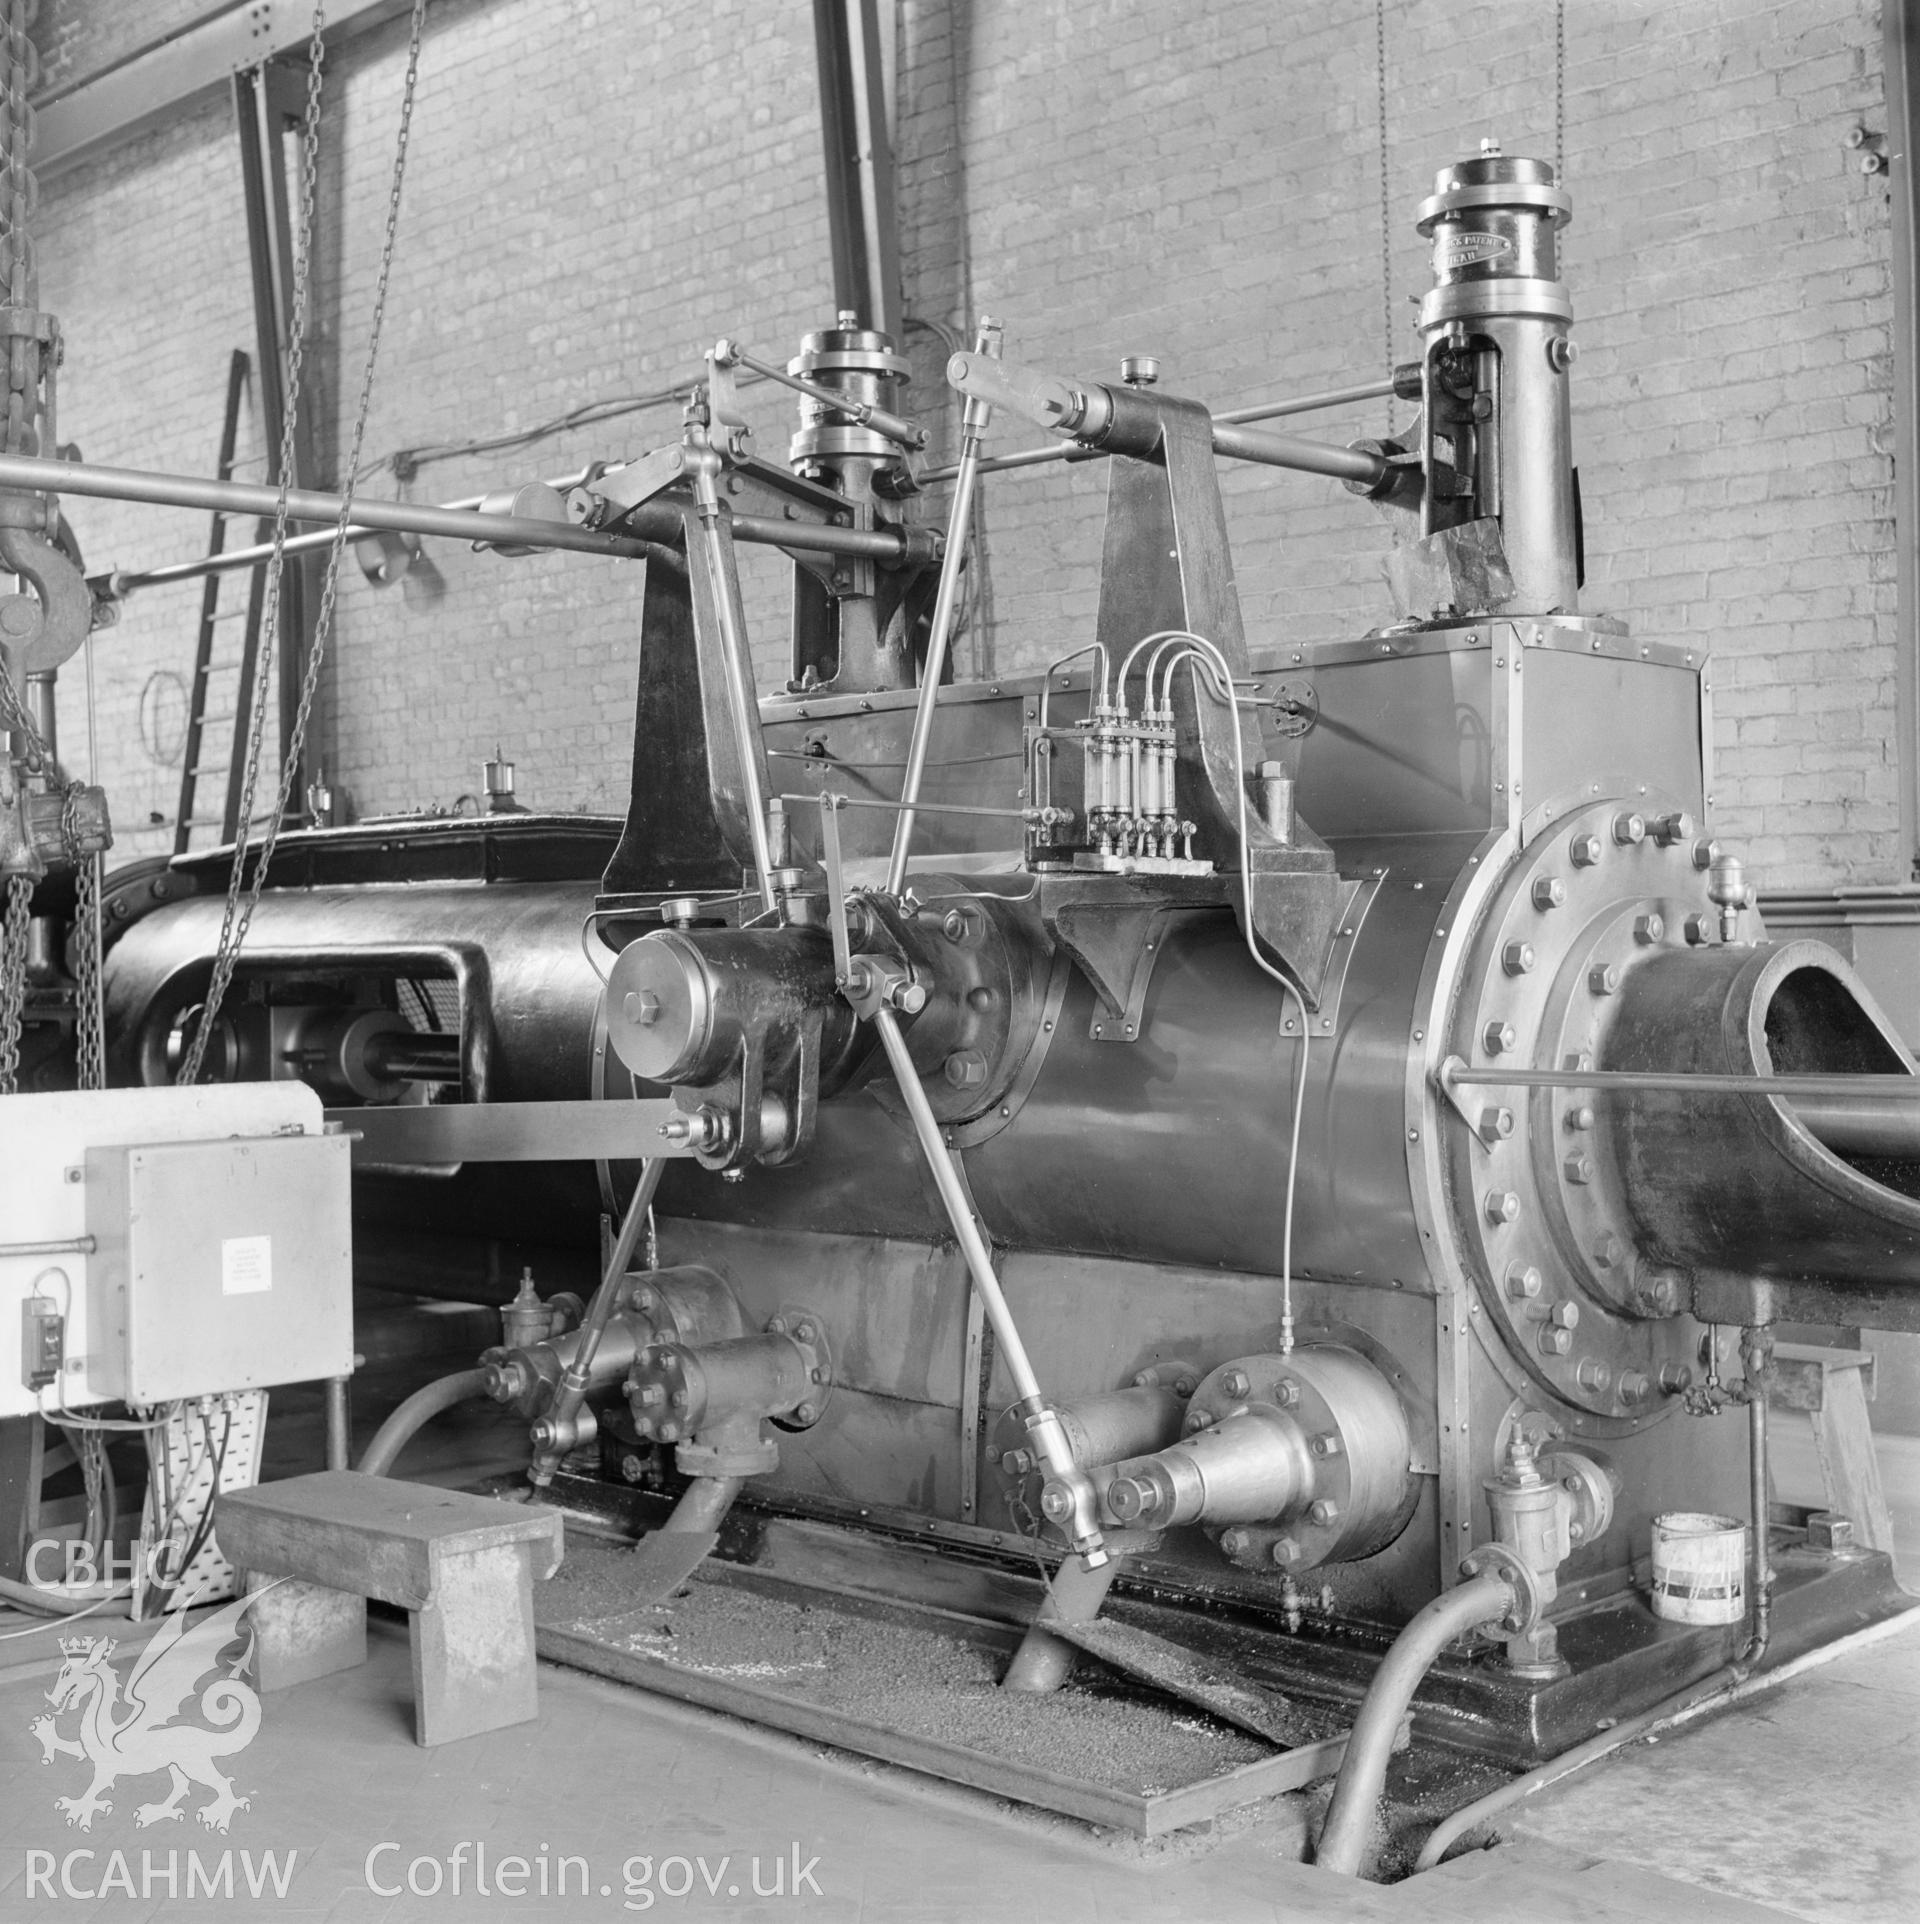 Digital copy of an acetate negative showing steam winder at Cefncoed Colliery, from the John Cornwell Collection.